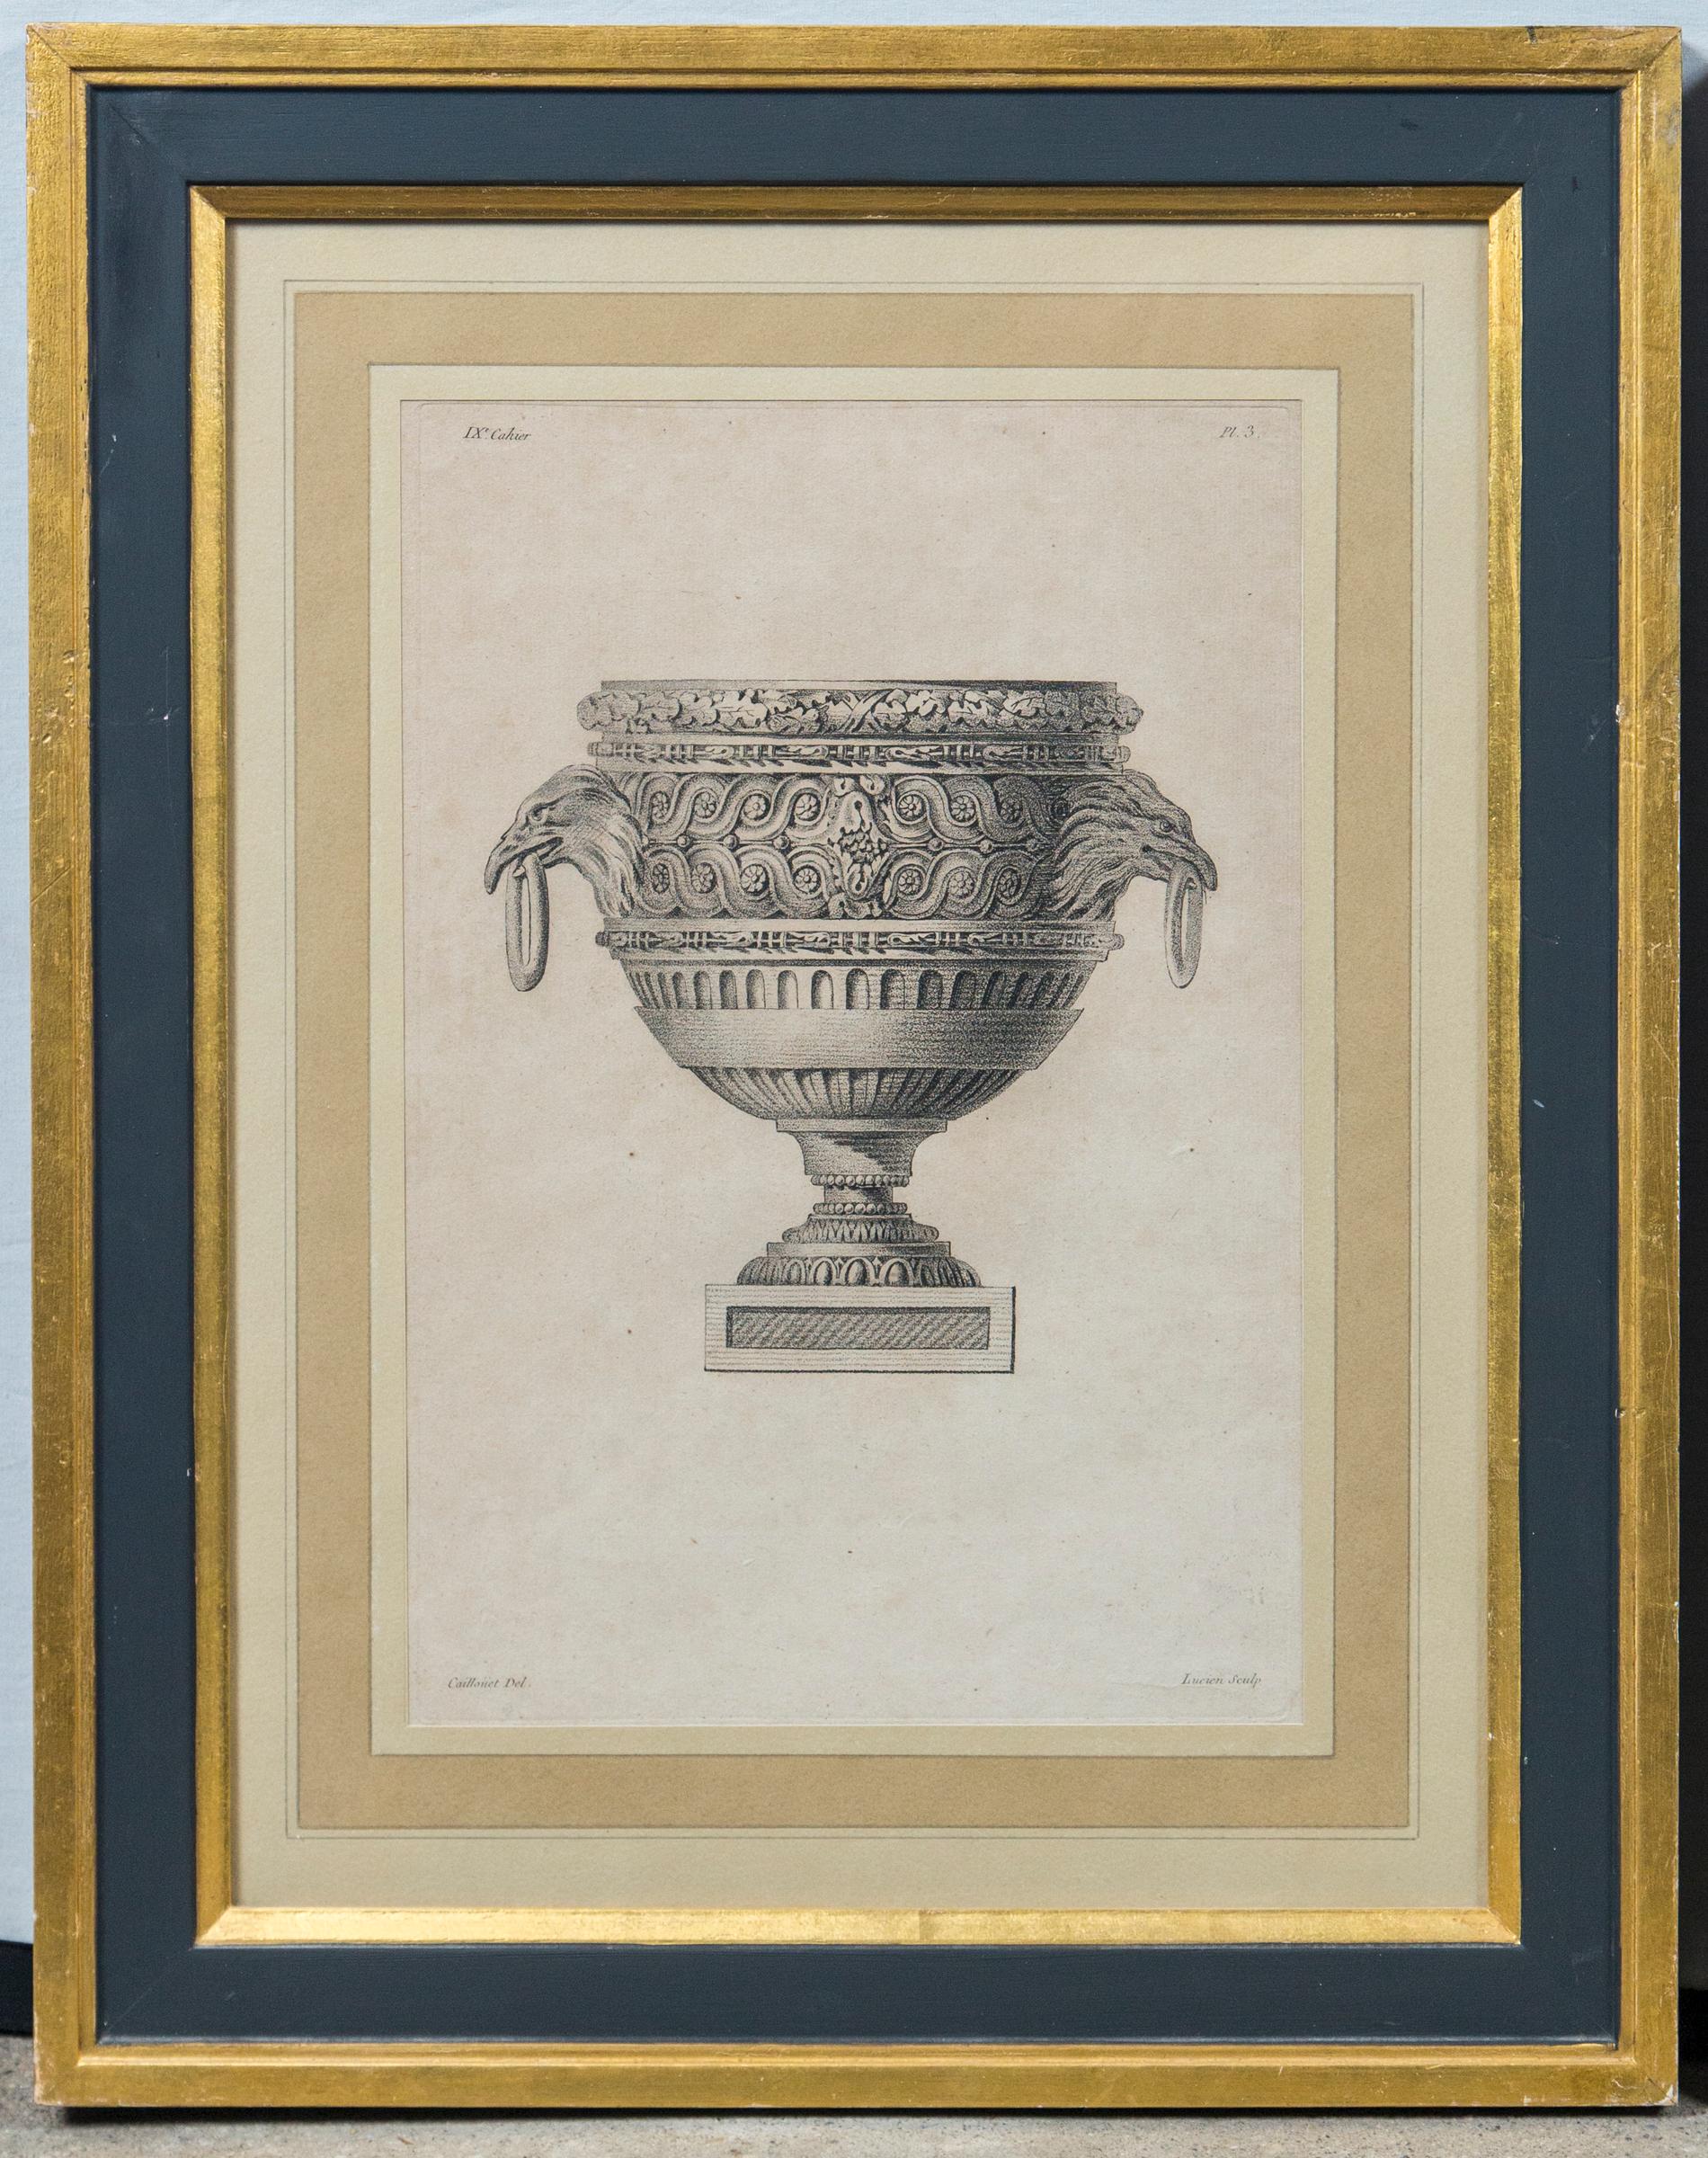 Set of 4 'Vase' Engravings by Andre-Louis Caillouet, France, Late 18th Century In Good Condition For Sale In Chappaqua, NY